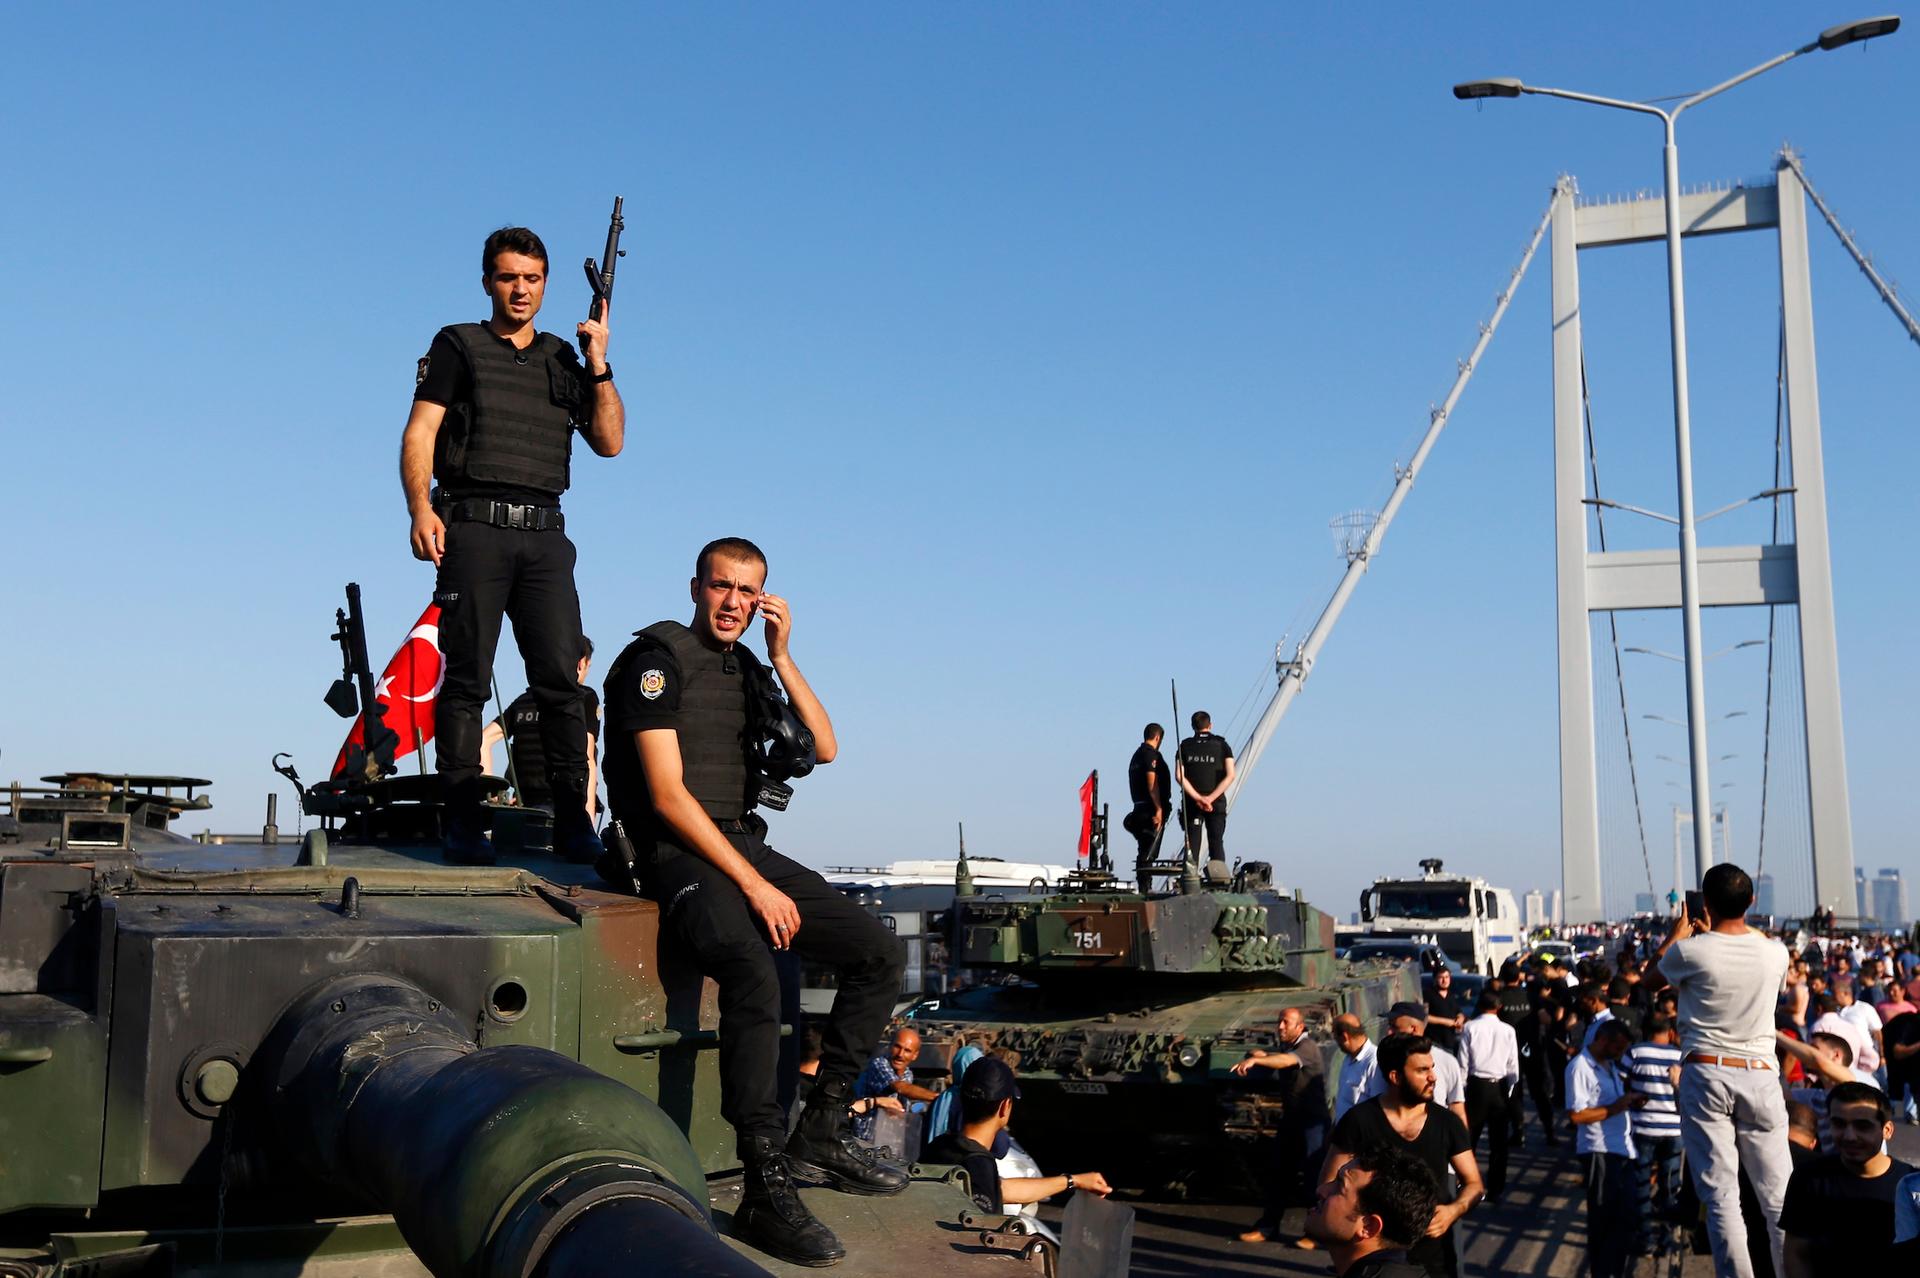 Policemen stand atop military armored vehicles after troops involved in the coup surrendered on the Bosphorus Bridge in Istanbul, Turkey, on July 16, 2016.